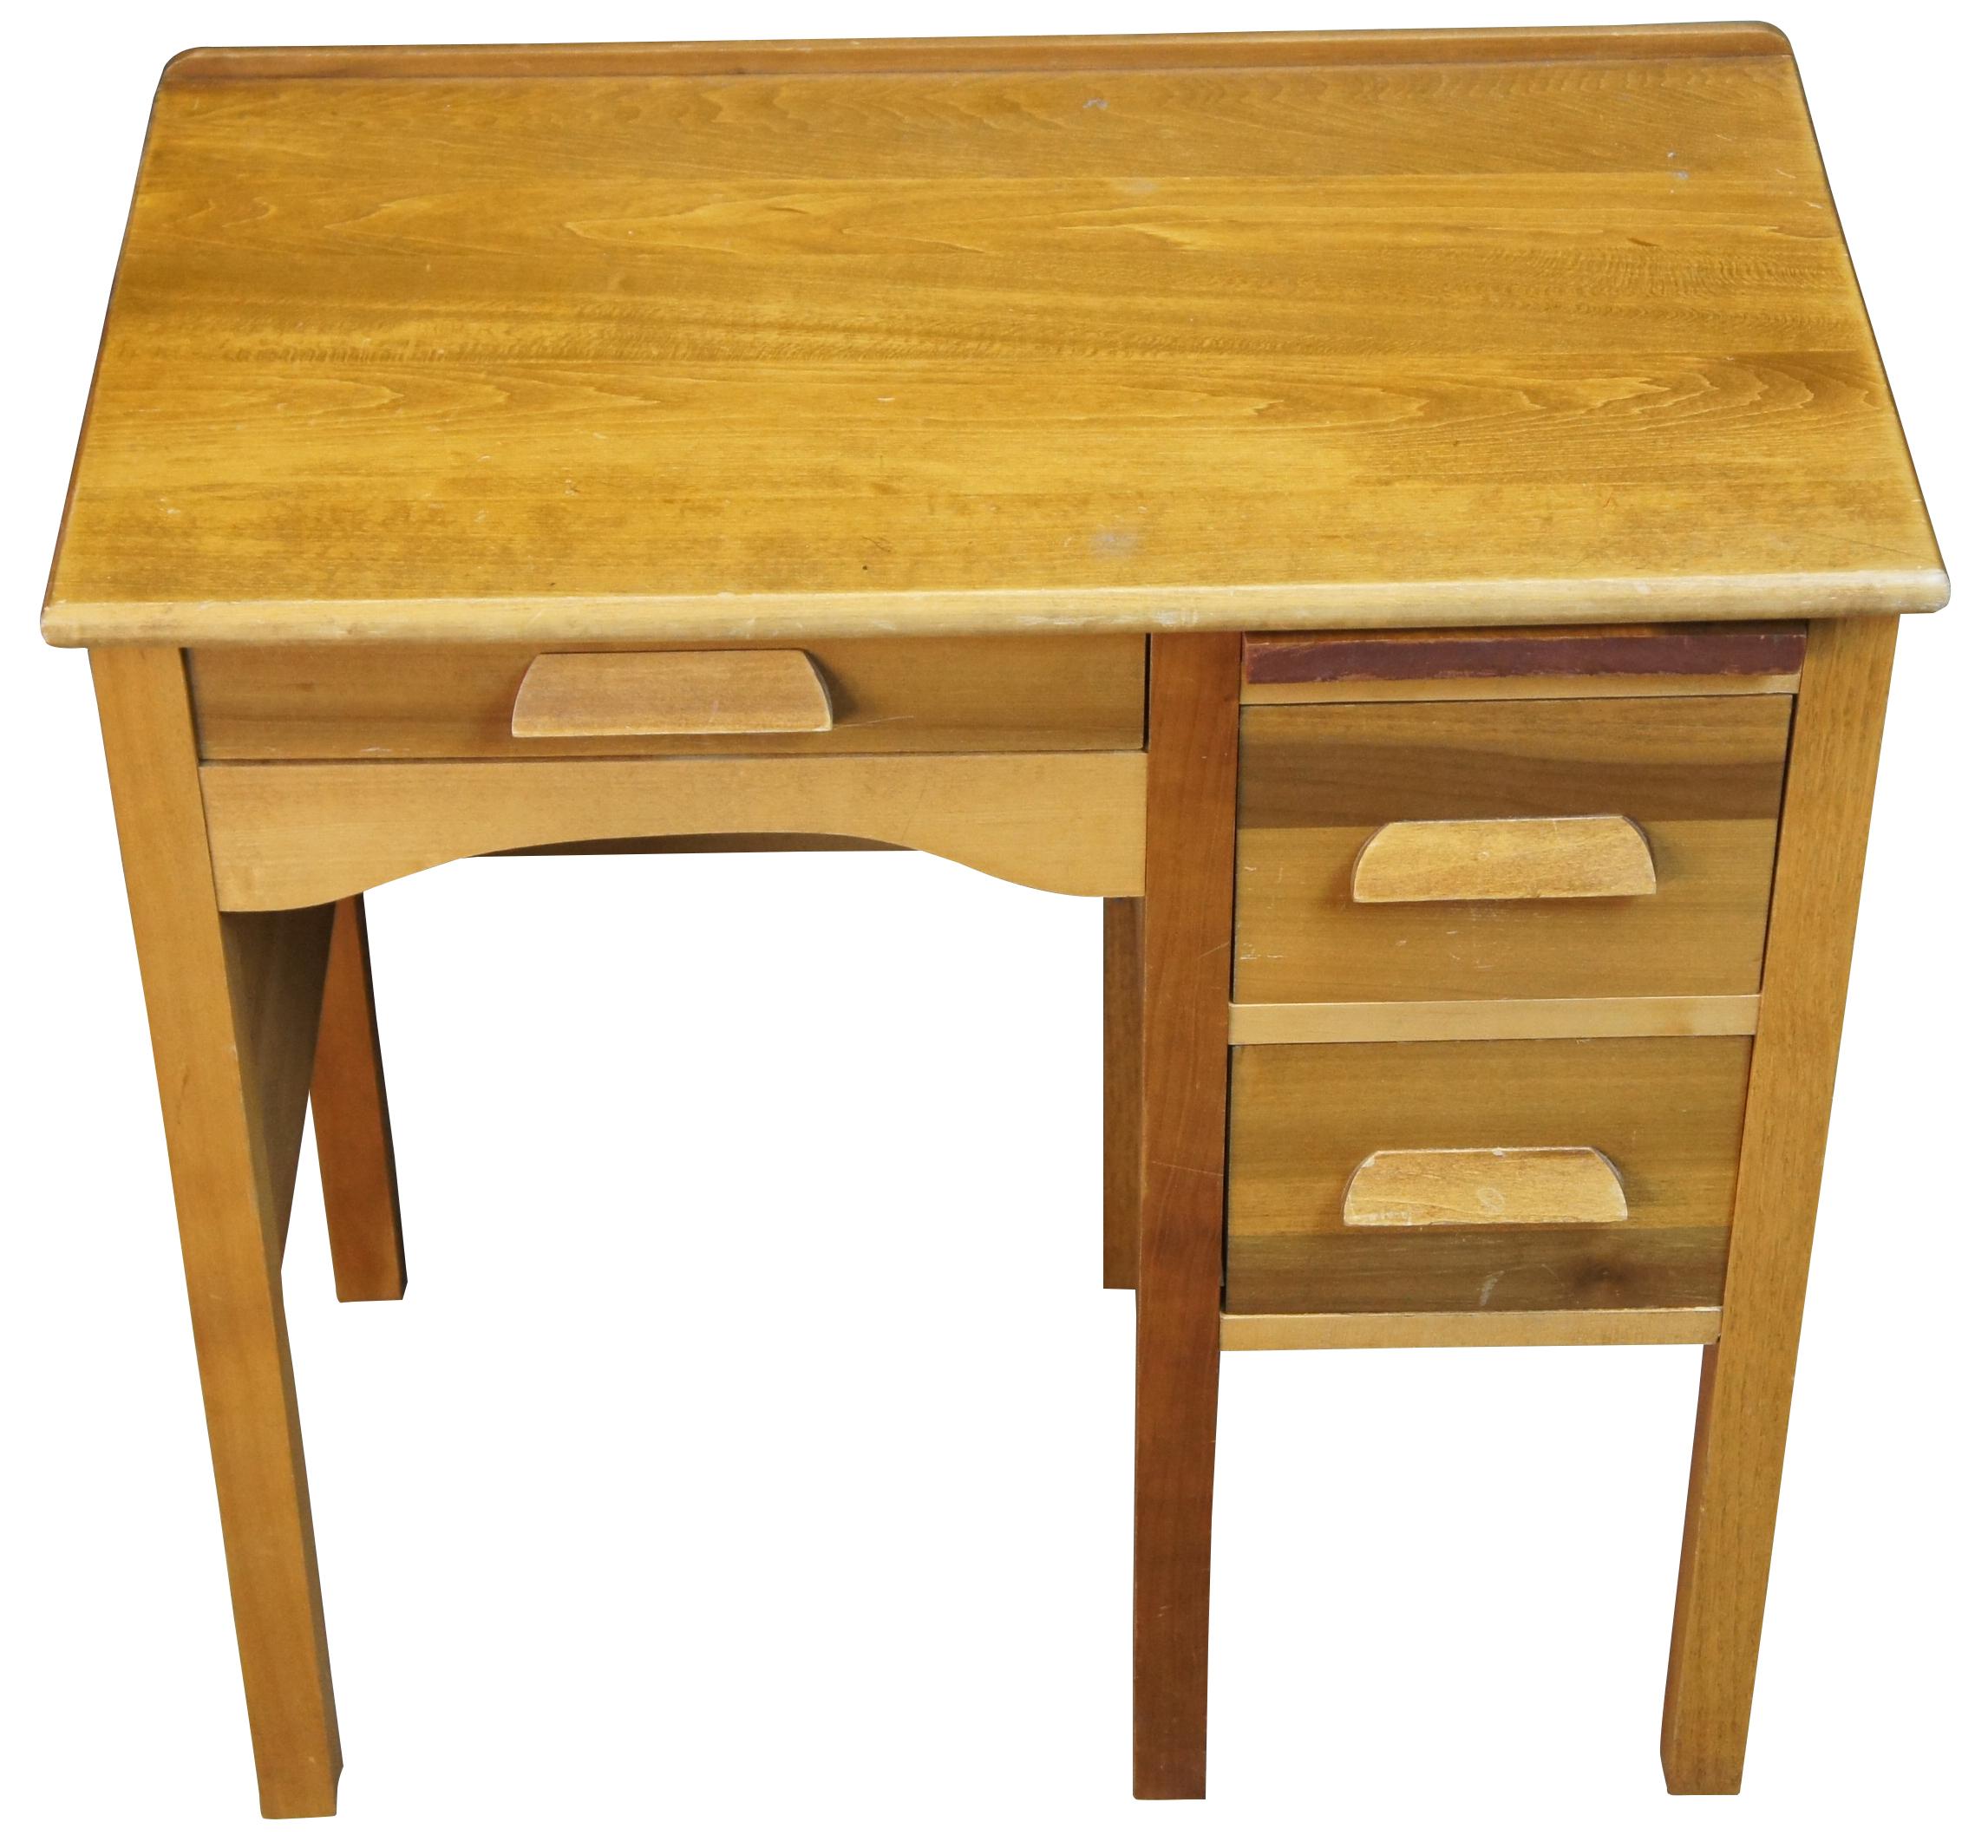 wooden school desk and chair